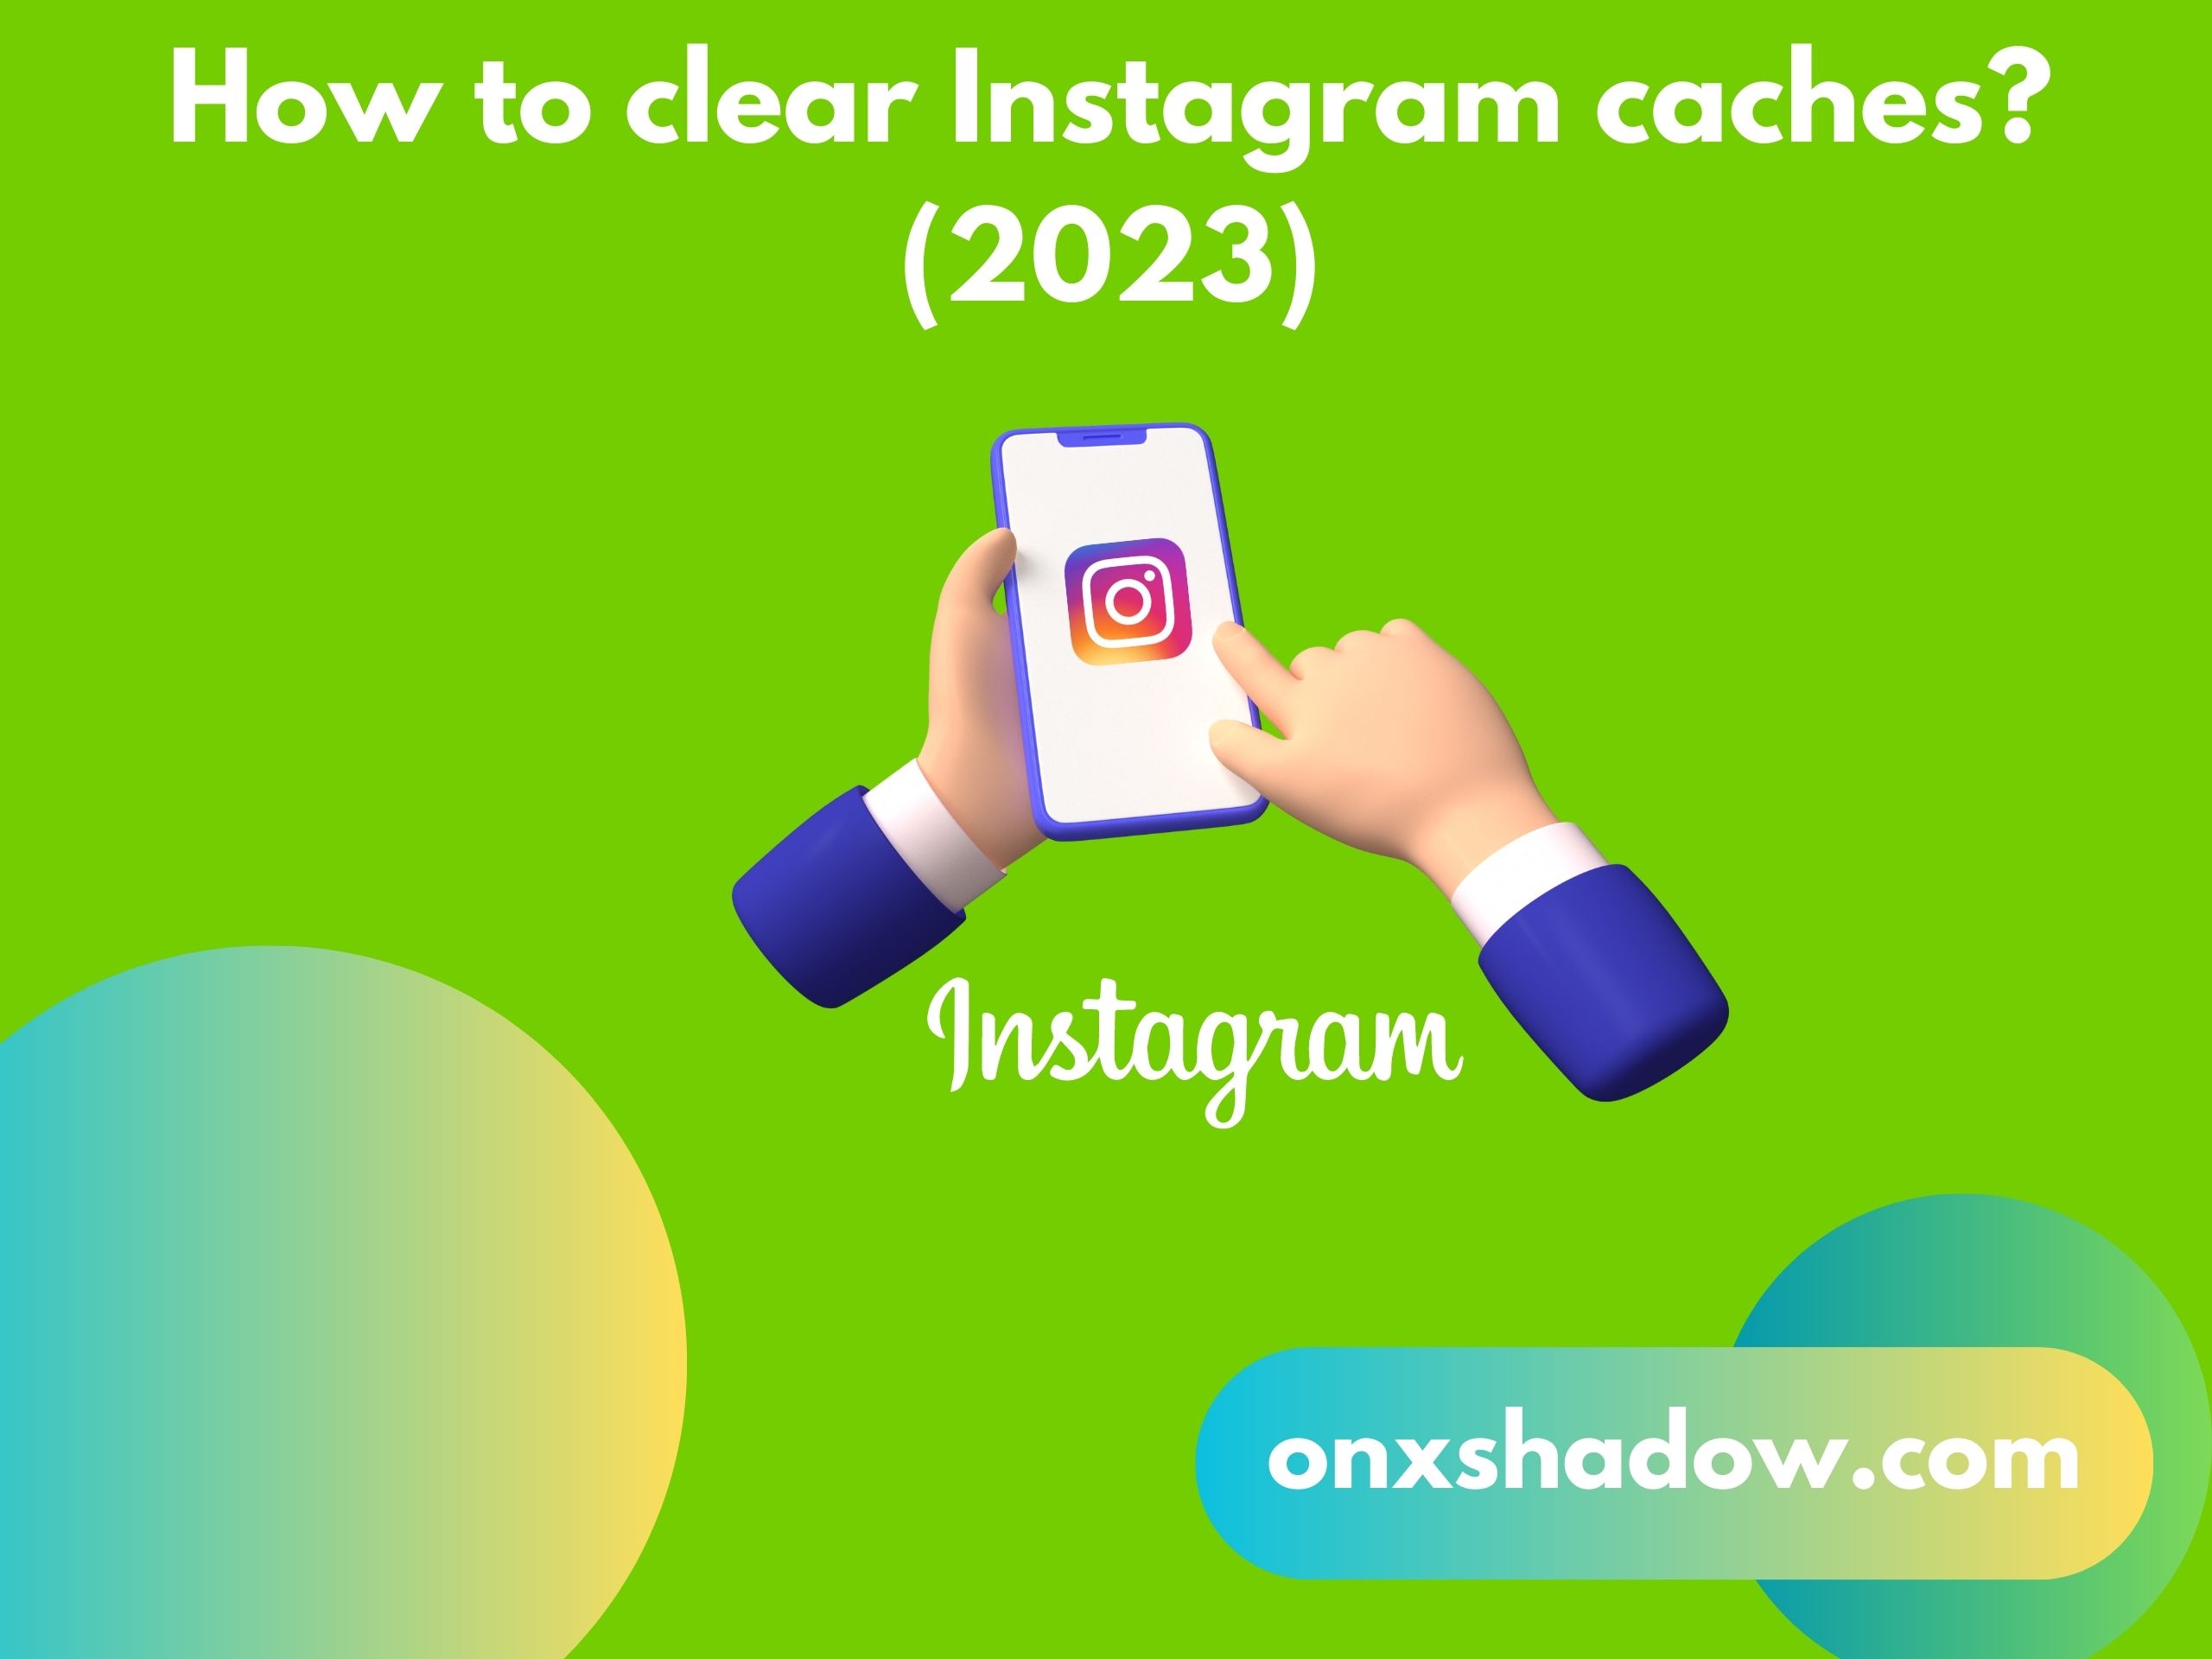 How to clear Instagram caches? (2023)